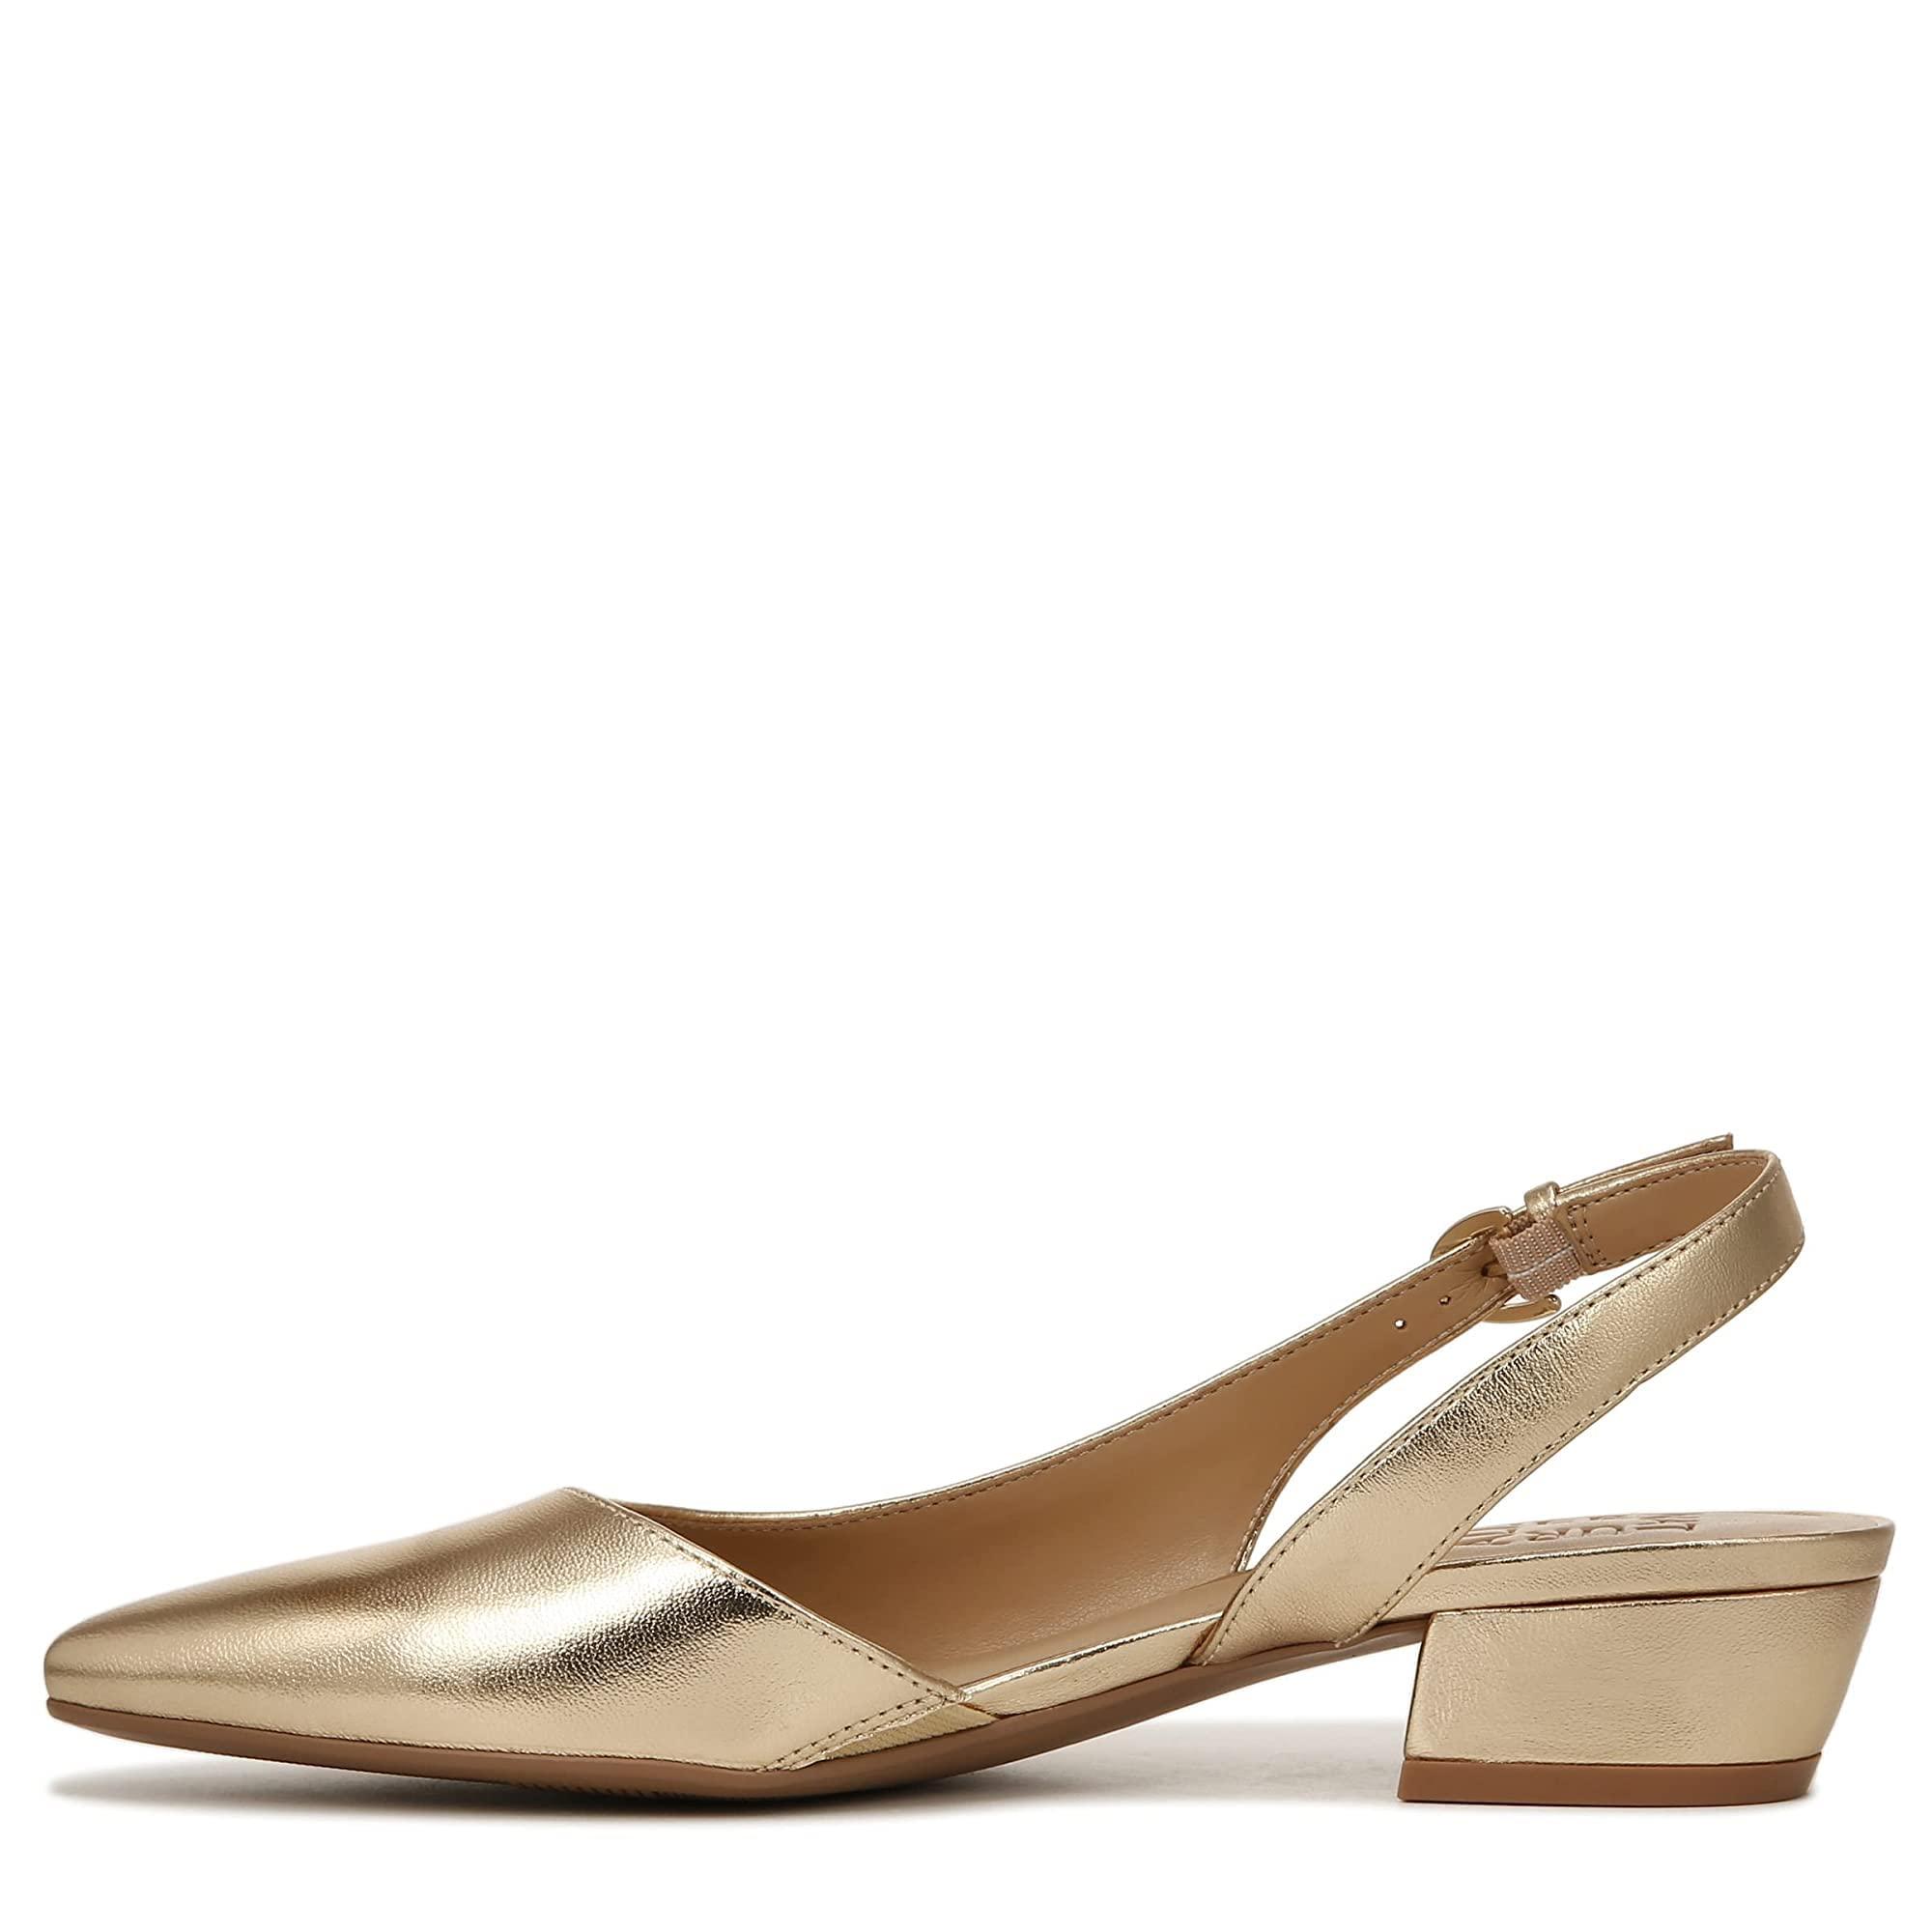 Naturalizer Banks Slingback Low Heel Pointed Toe Pumps in Natural | Lyst